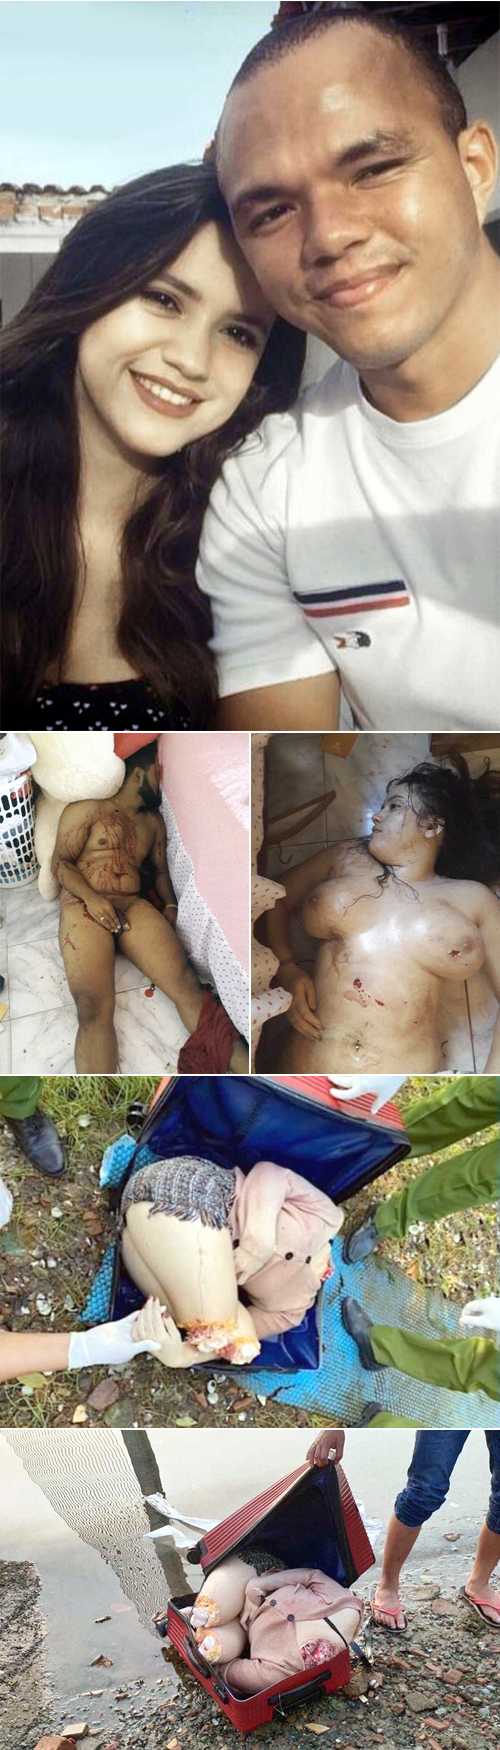 CrazyShit NO MERCY SHOWN FOR CHEATING WIFE AND HER SIDE-LOVER picture image